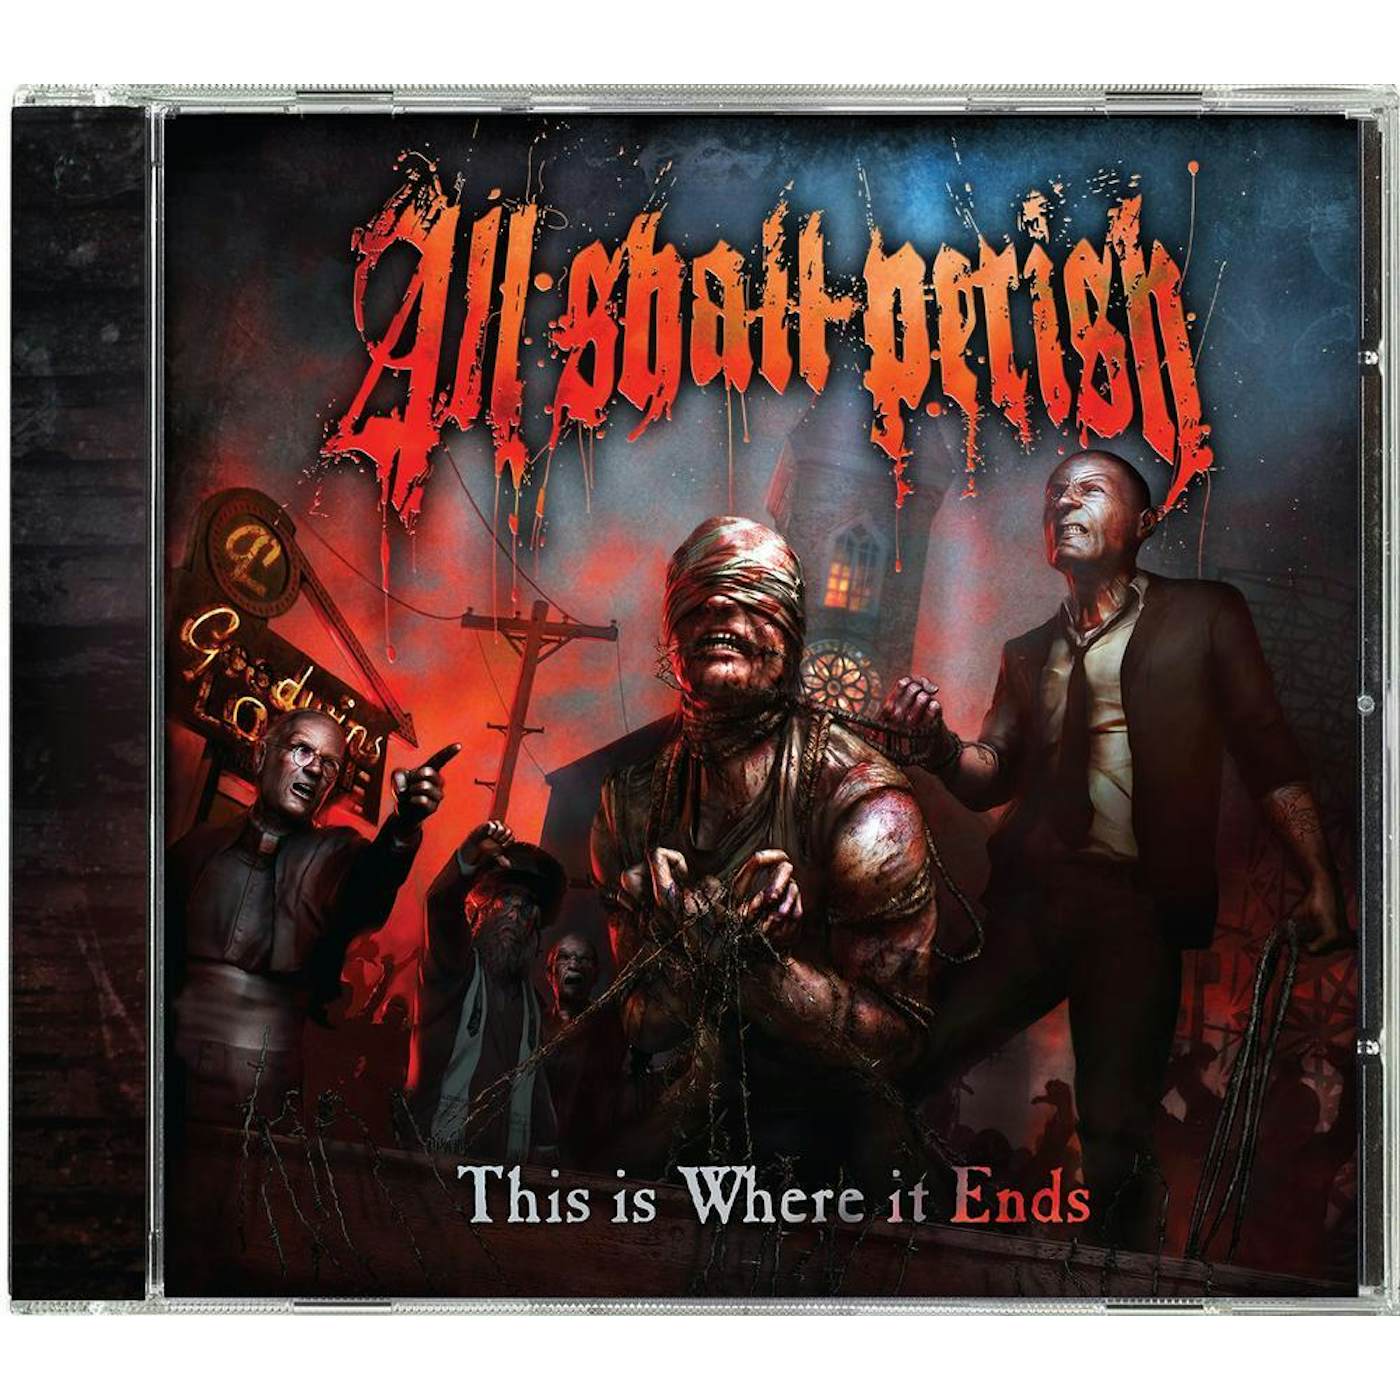 All Shall Perish "This Is Where It Ends" CD